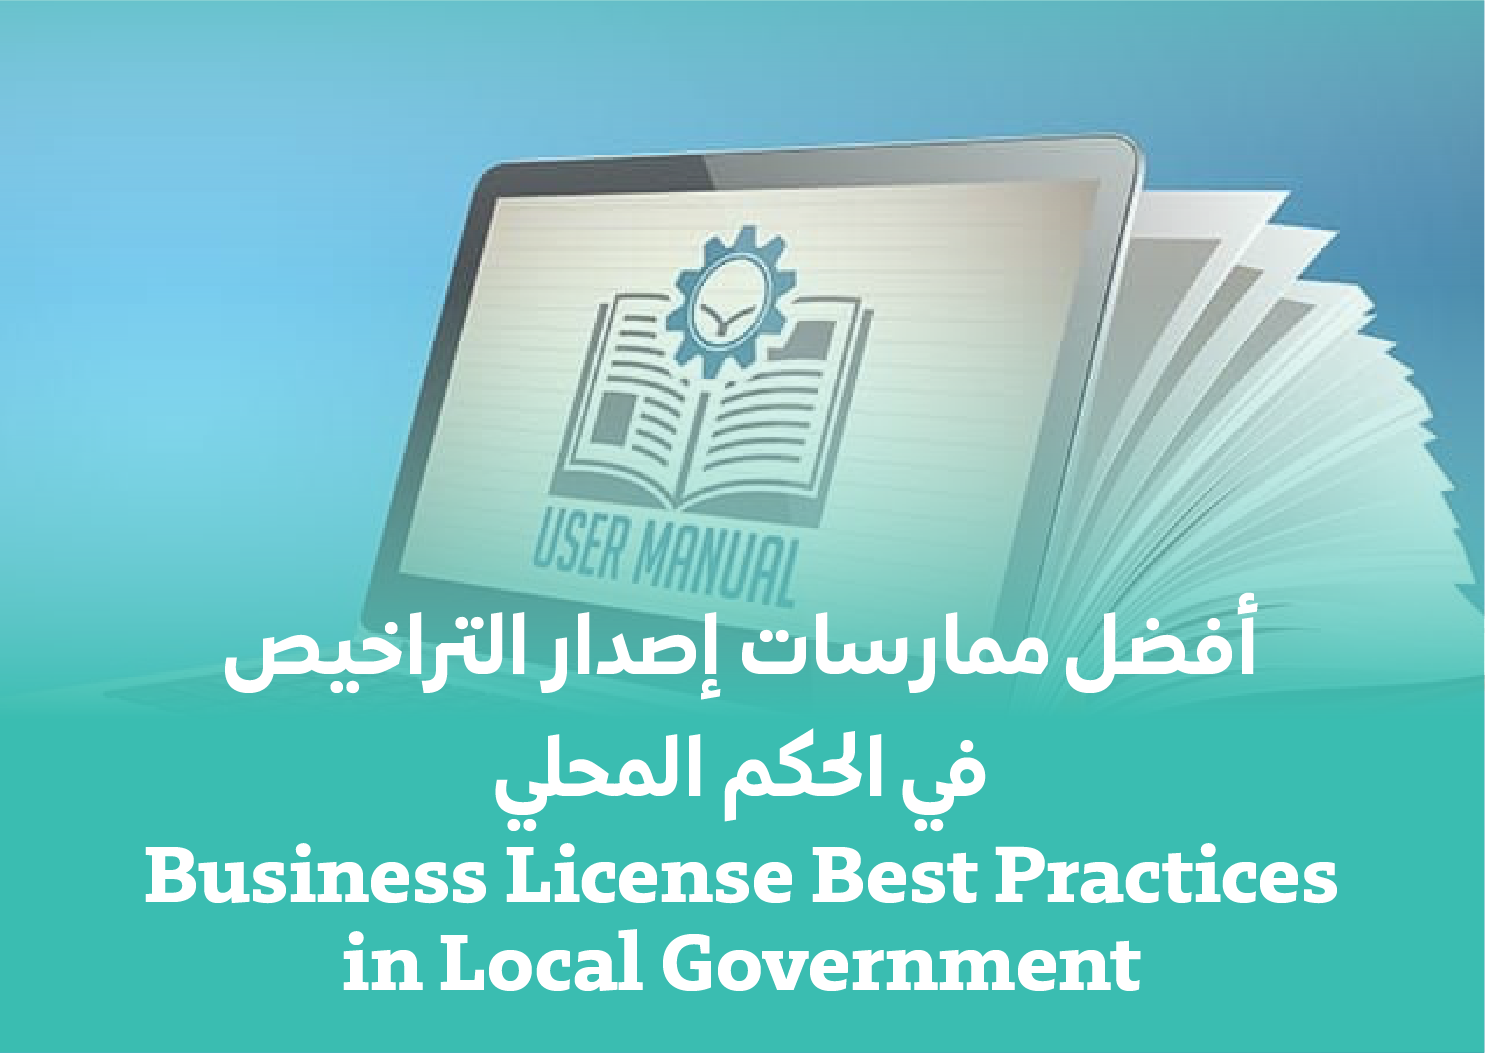 Business License Best Practices in Local Government